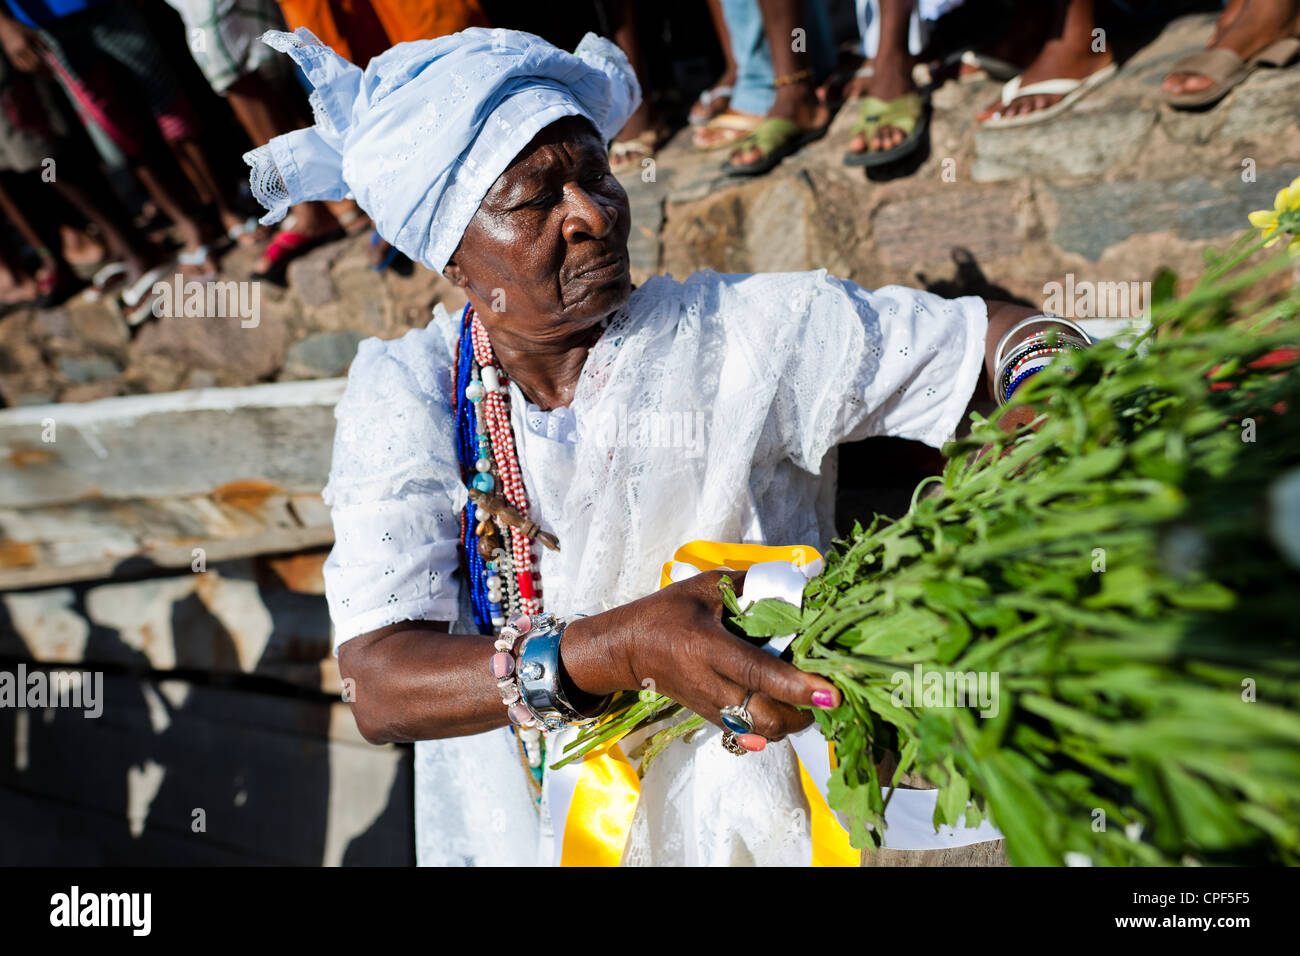 A Baiana woman holds medicinal herbs during the ritual ceremony in honor to Yemanjá in Cachoeira, Bahia, Brazil. Stock Photo